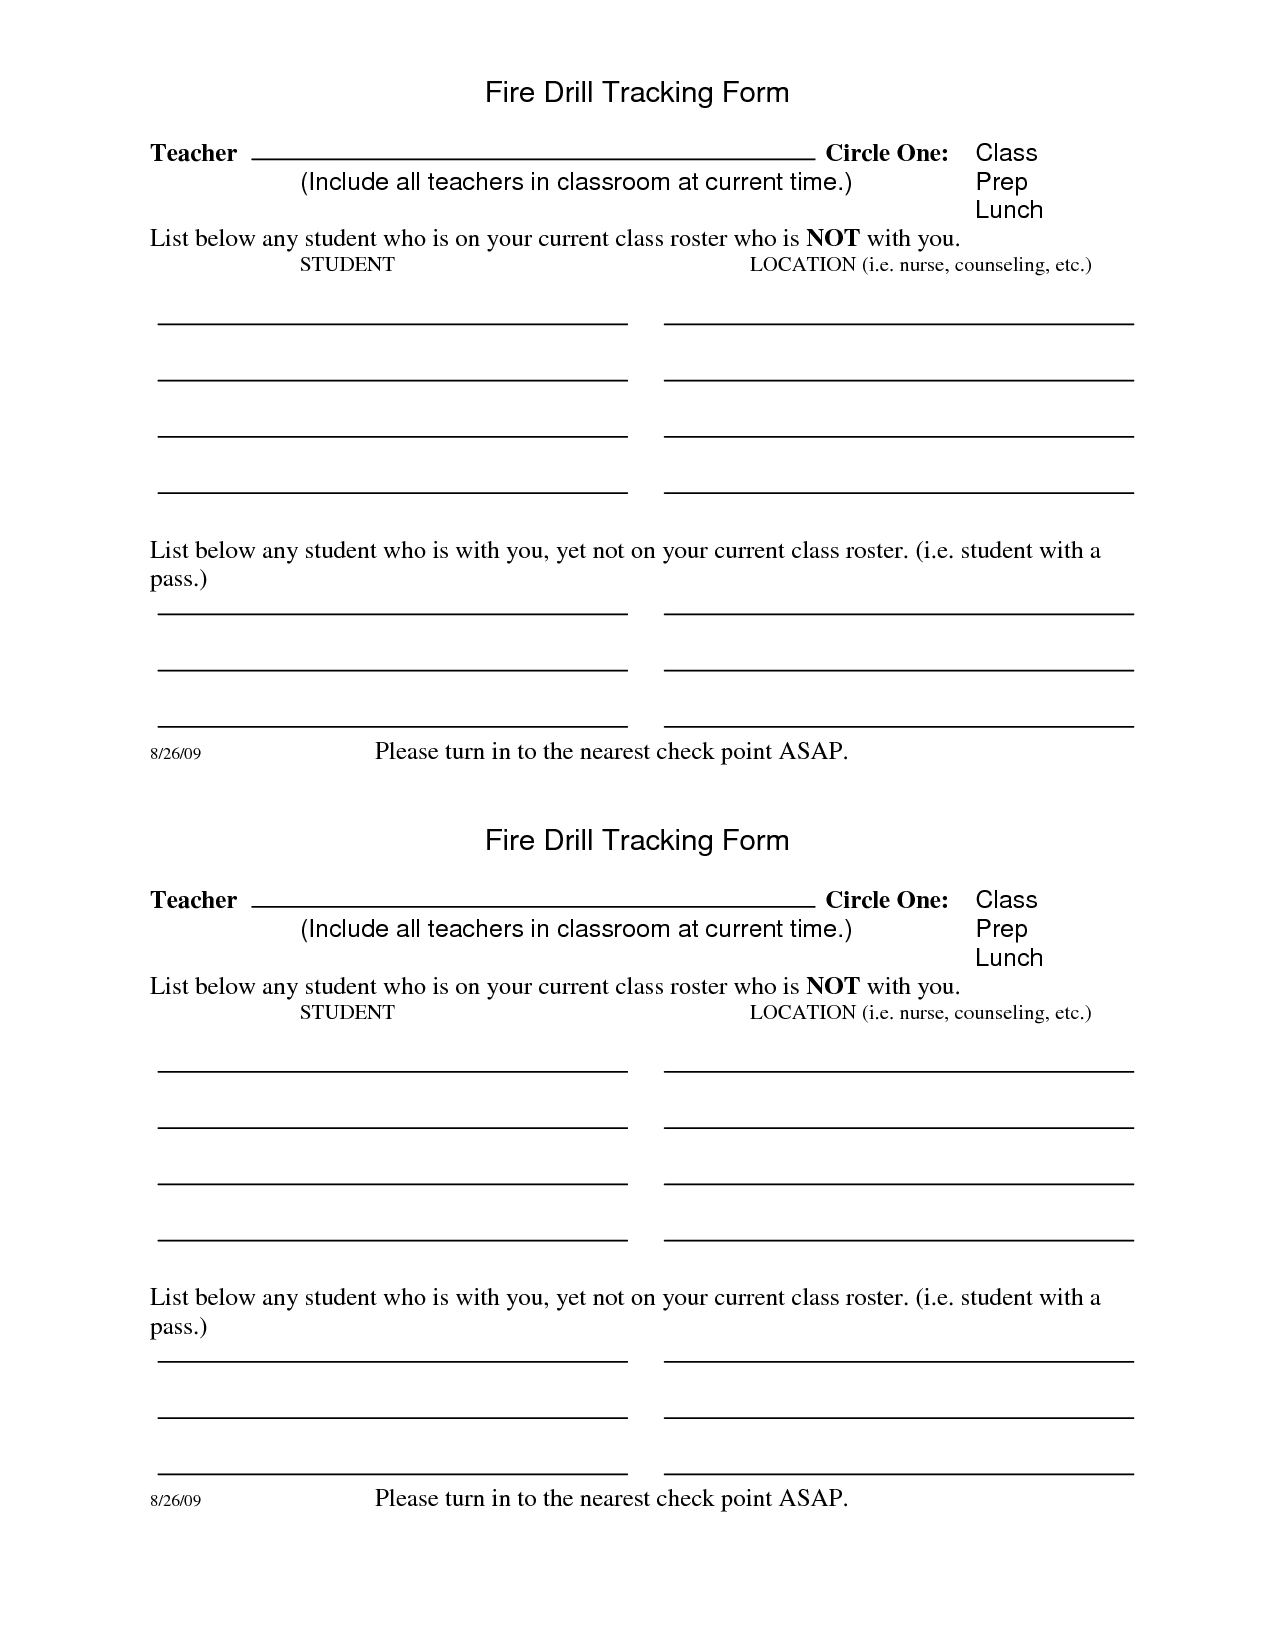 22 Images Of Osha Fire Drill Safety Template | Jackmonster Within Emergency Drill Report Template